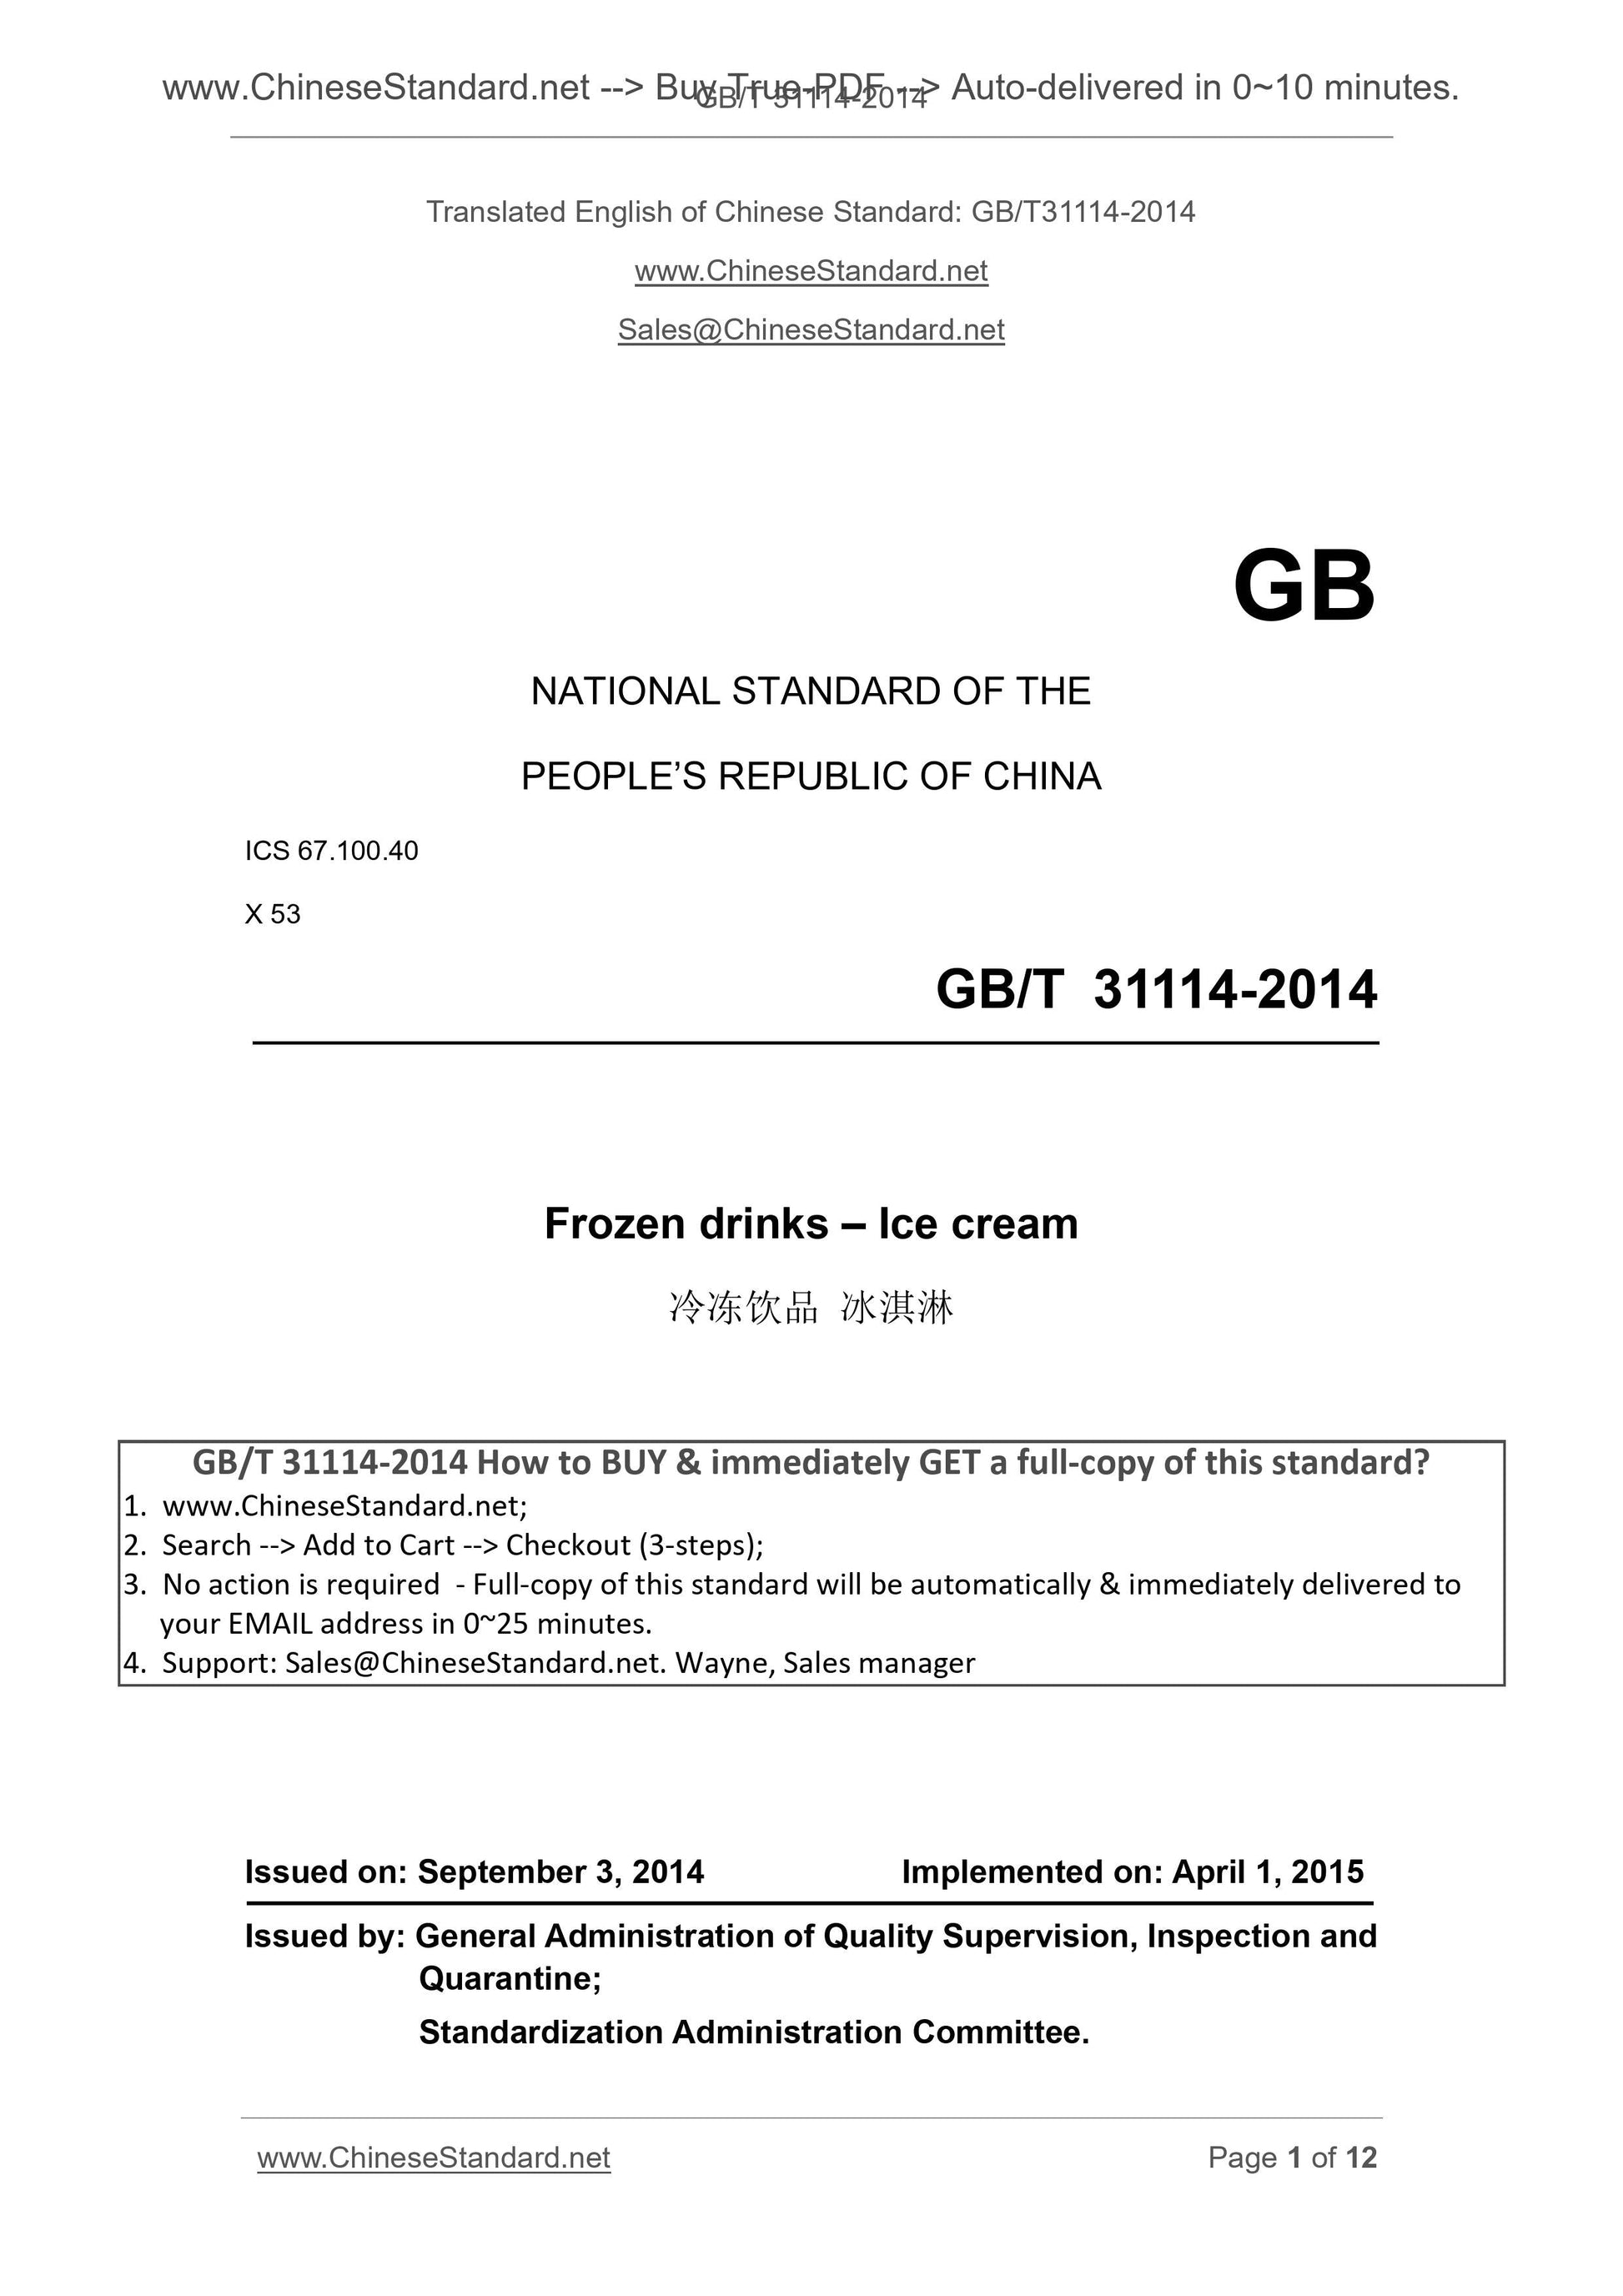 GB/T 31114-2014 Page 1